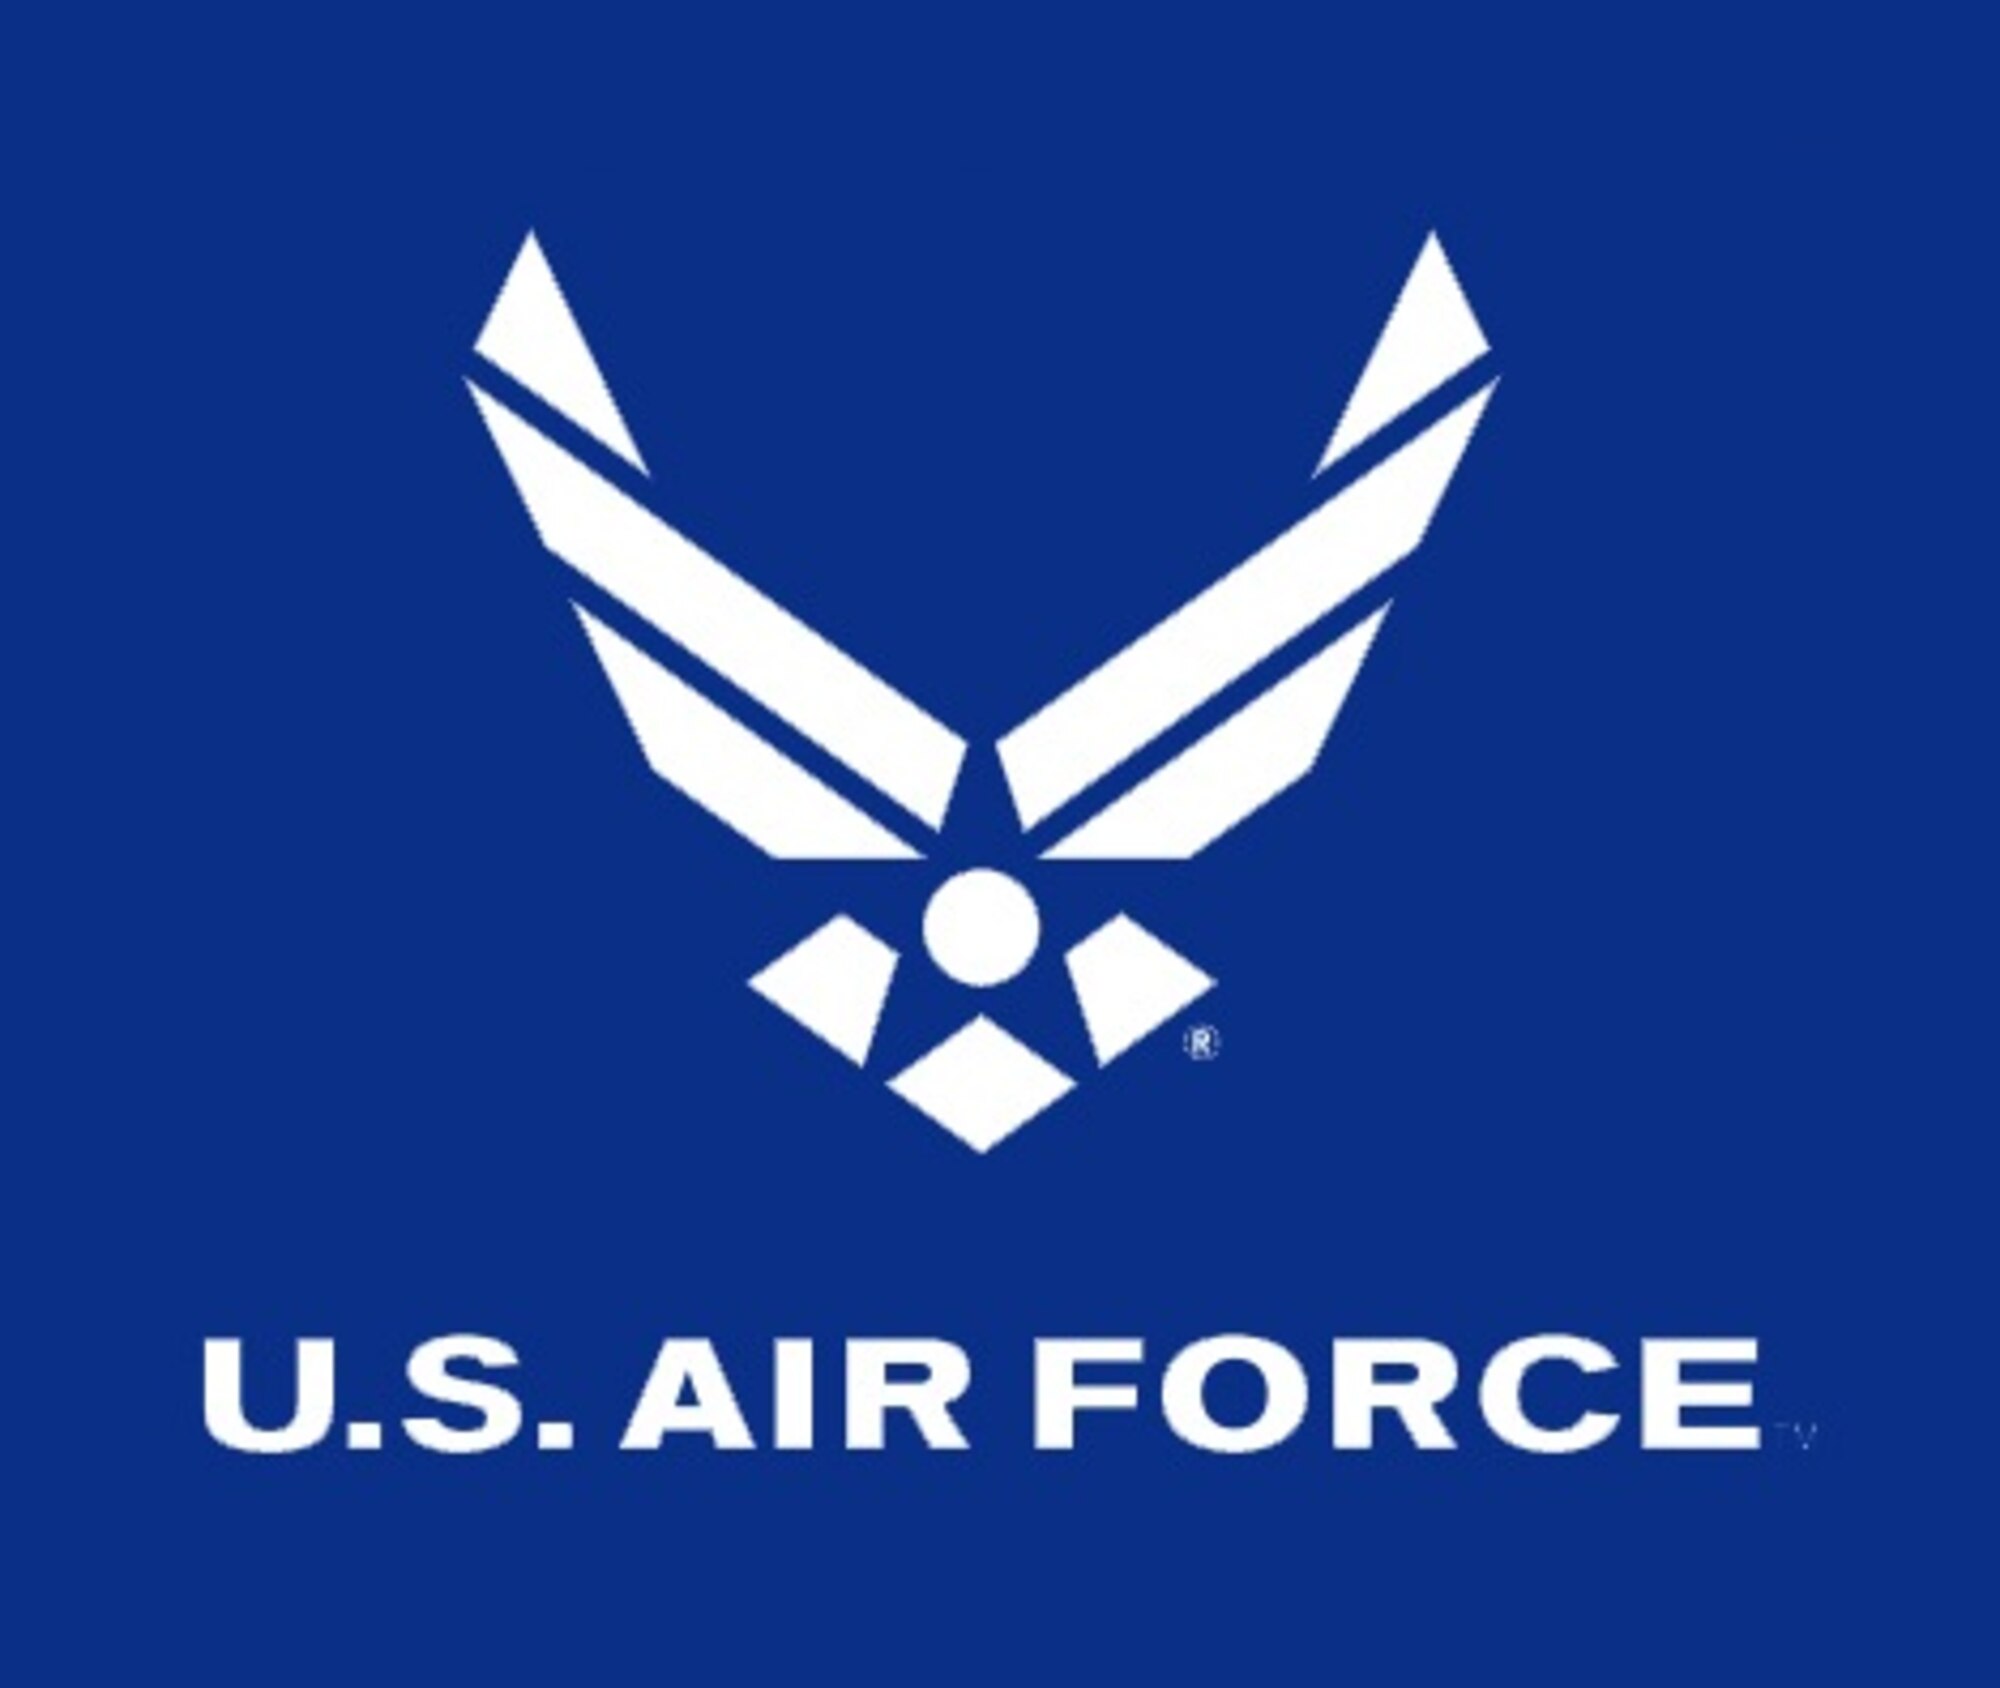 As you execute our Air Force mission or participate in summer activities with your family and friends, please use what you have learned about risk management. Plan for the unexpected, make wise choices, and avoid unnecessary risks. Your families need you, and our Nation needs you to be healthy and fit to accomplish our mission.